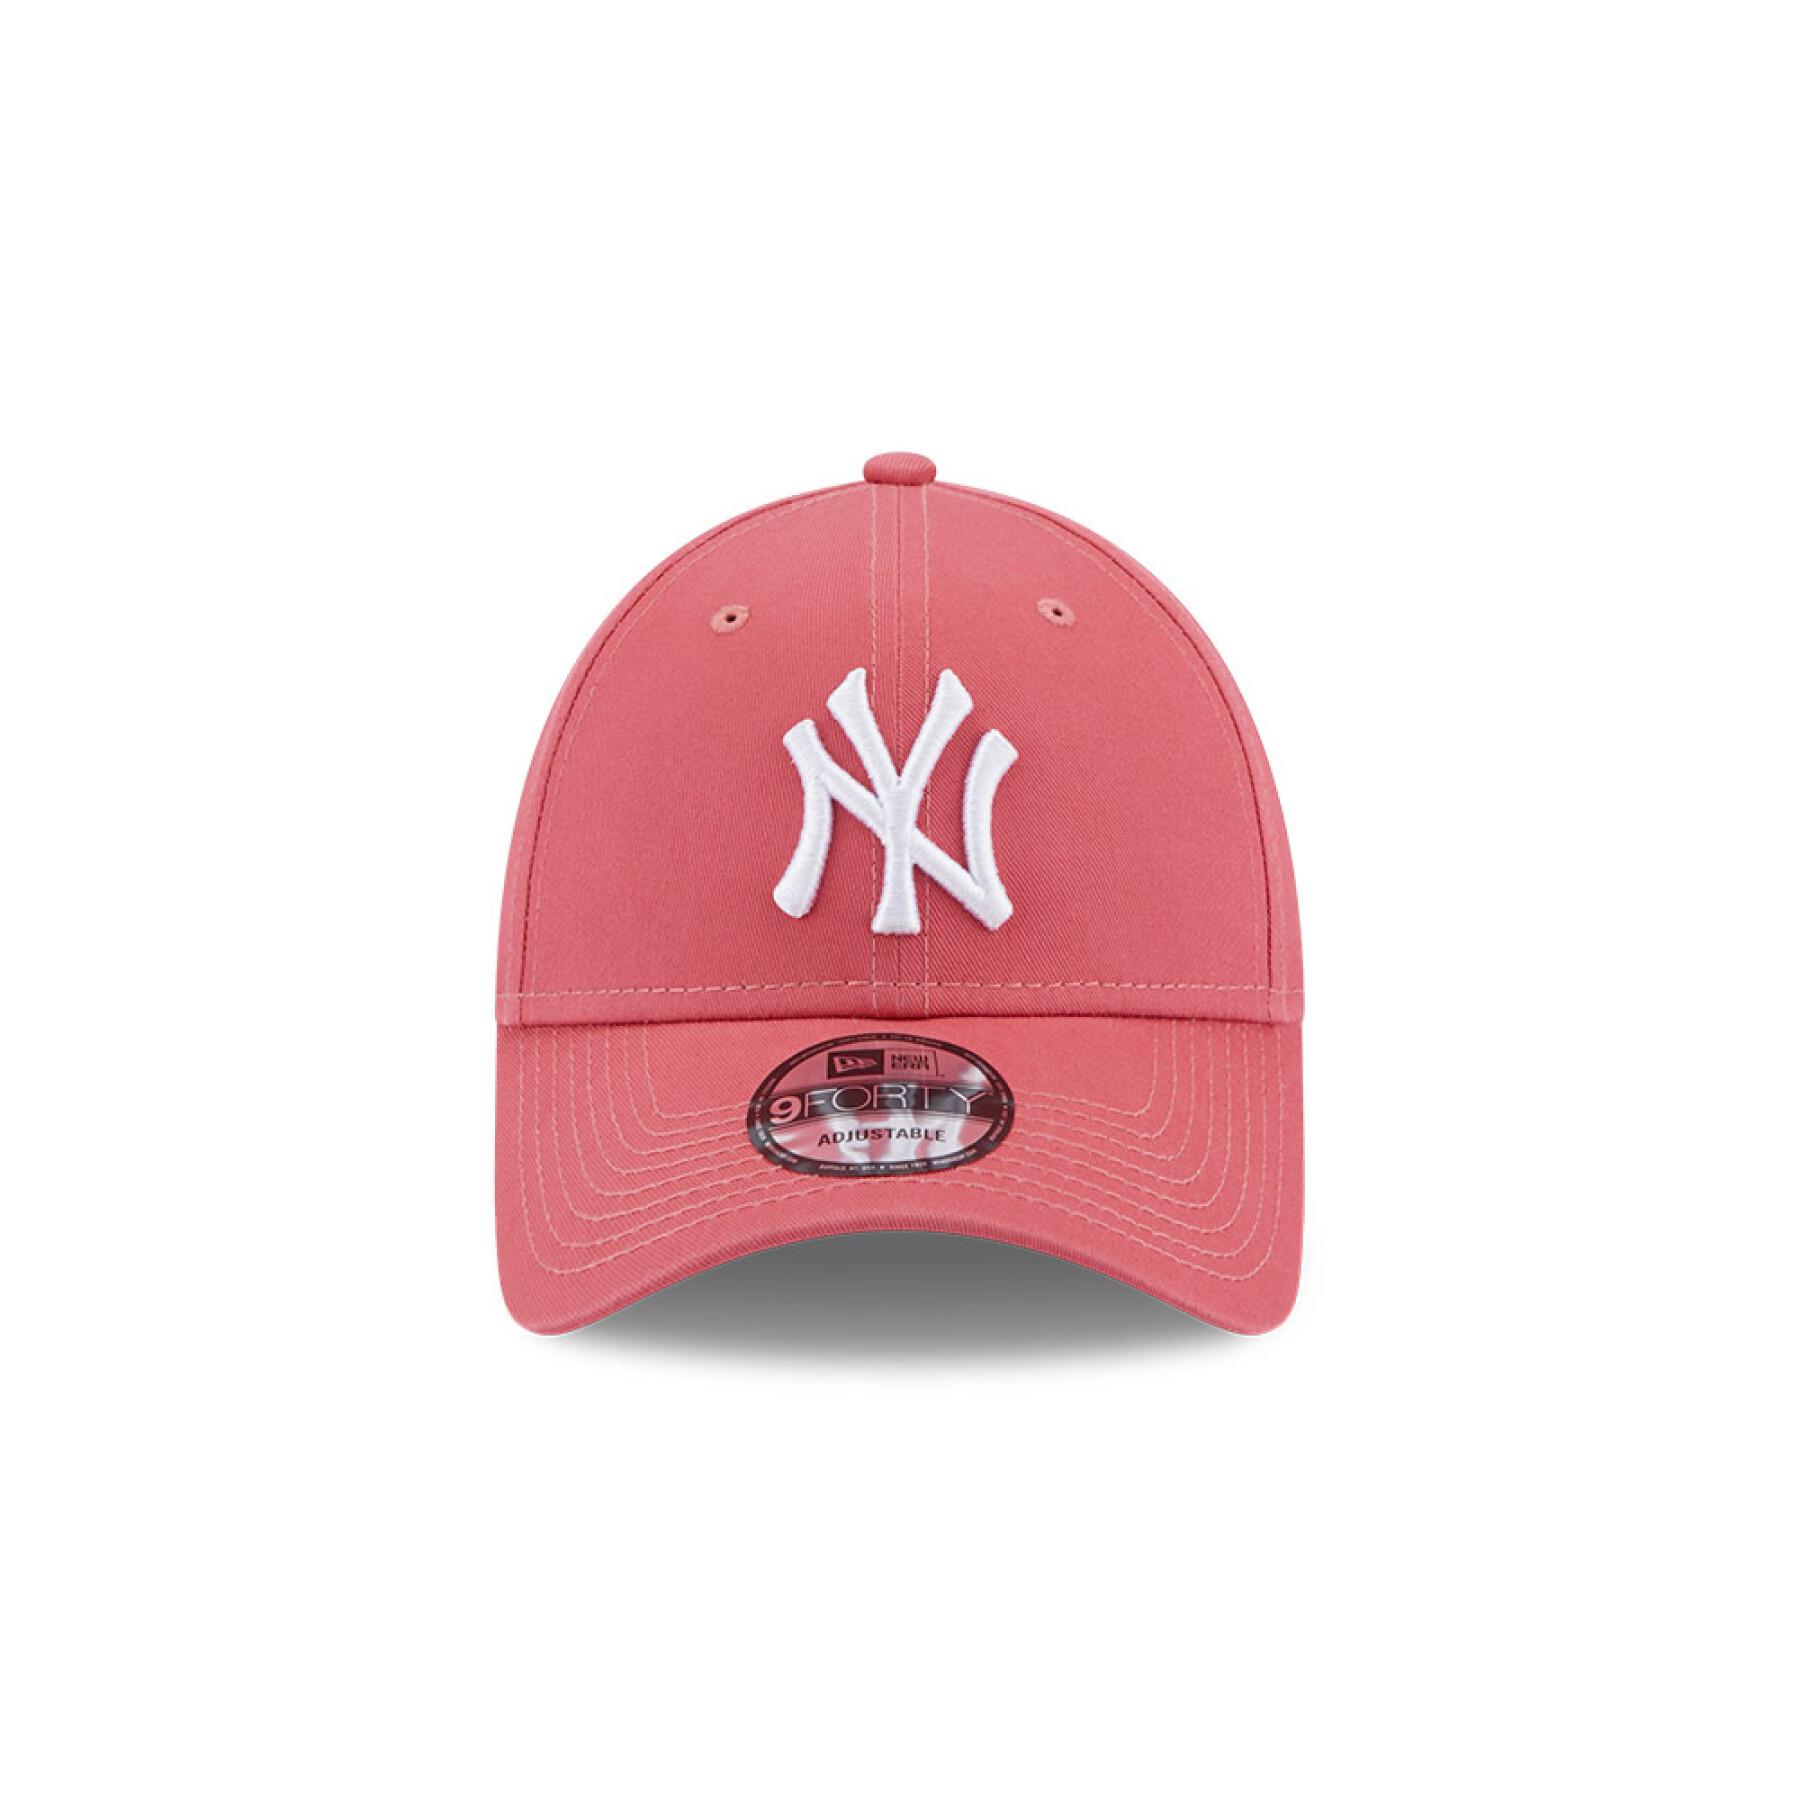 Cap 9forty New York Yankees League Essential